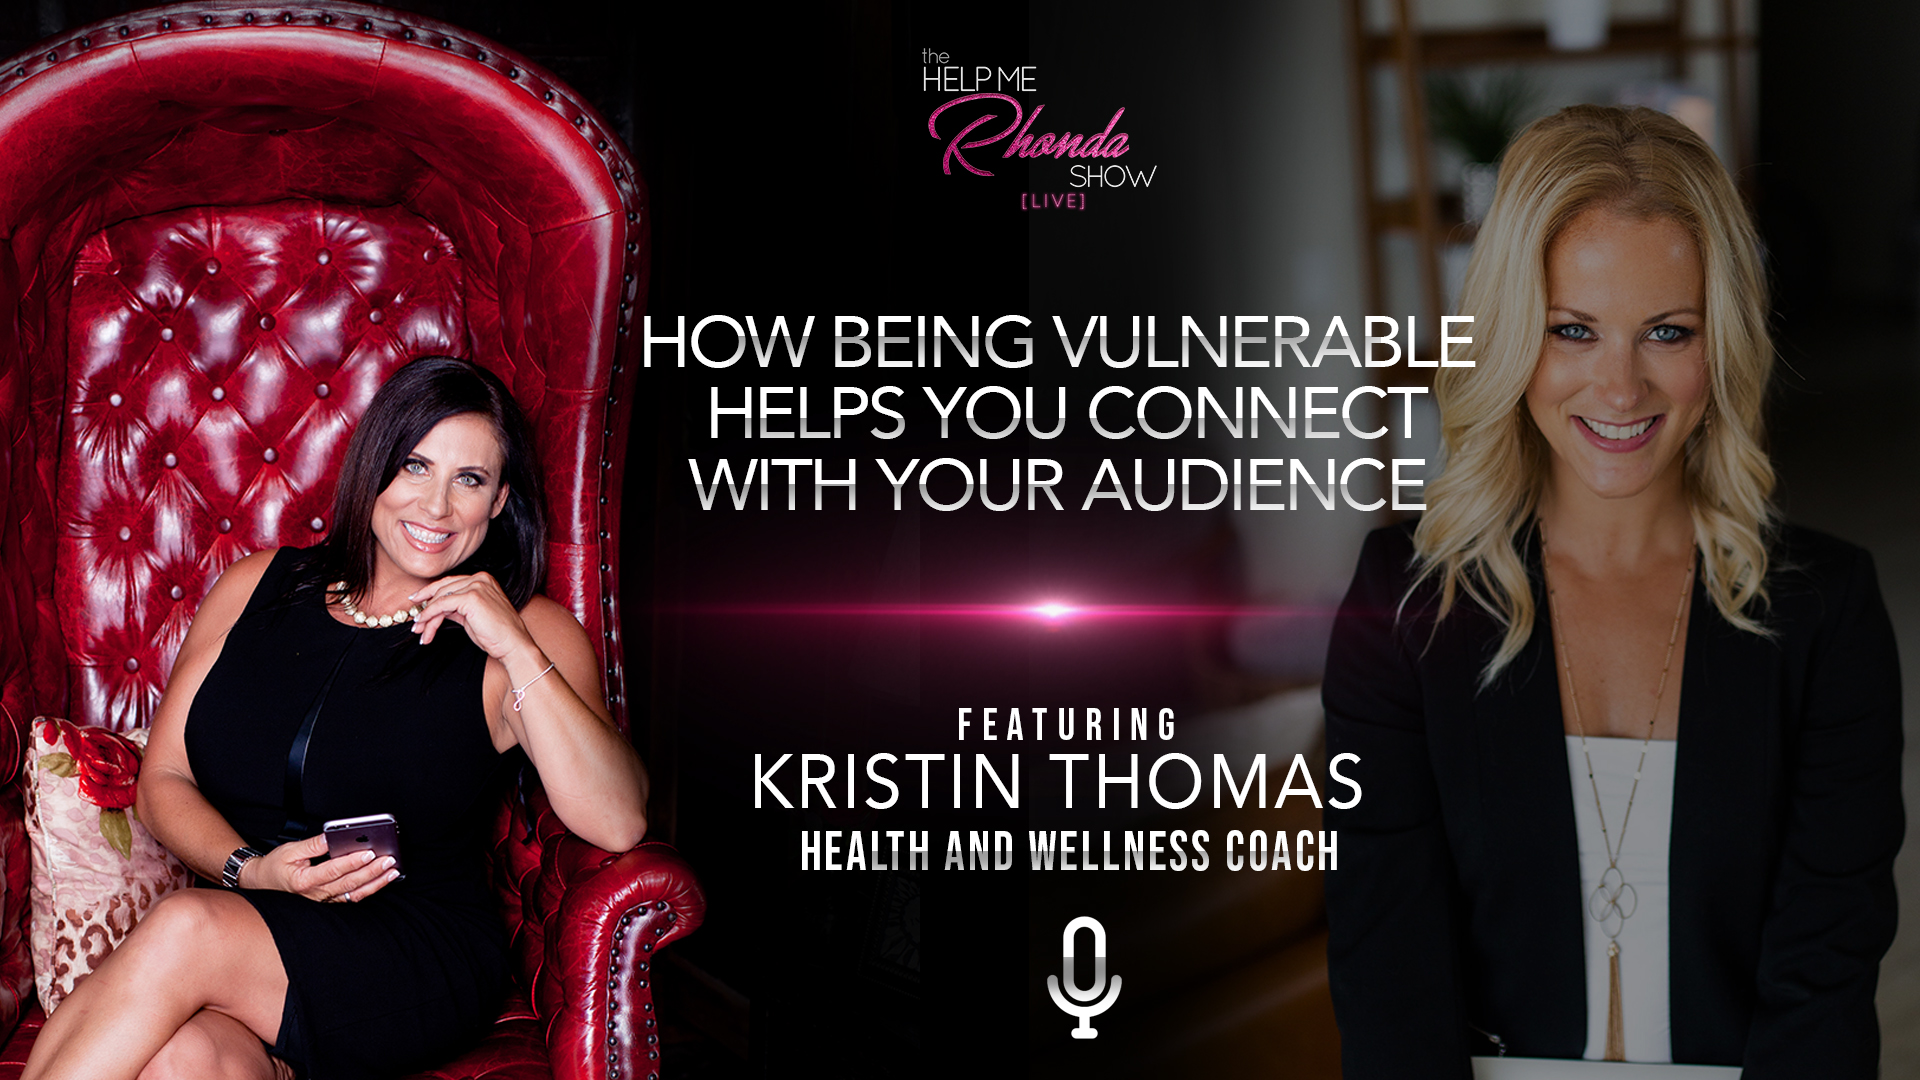 Kristin Thomas - How Being Vulnerable Help You Connect With Your Audience